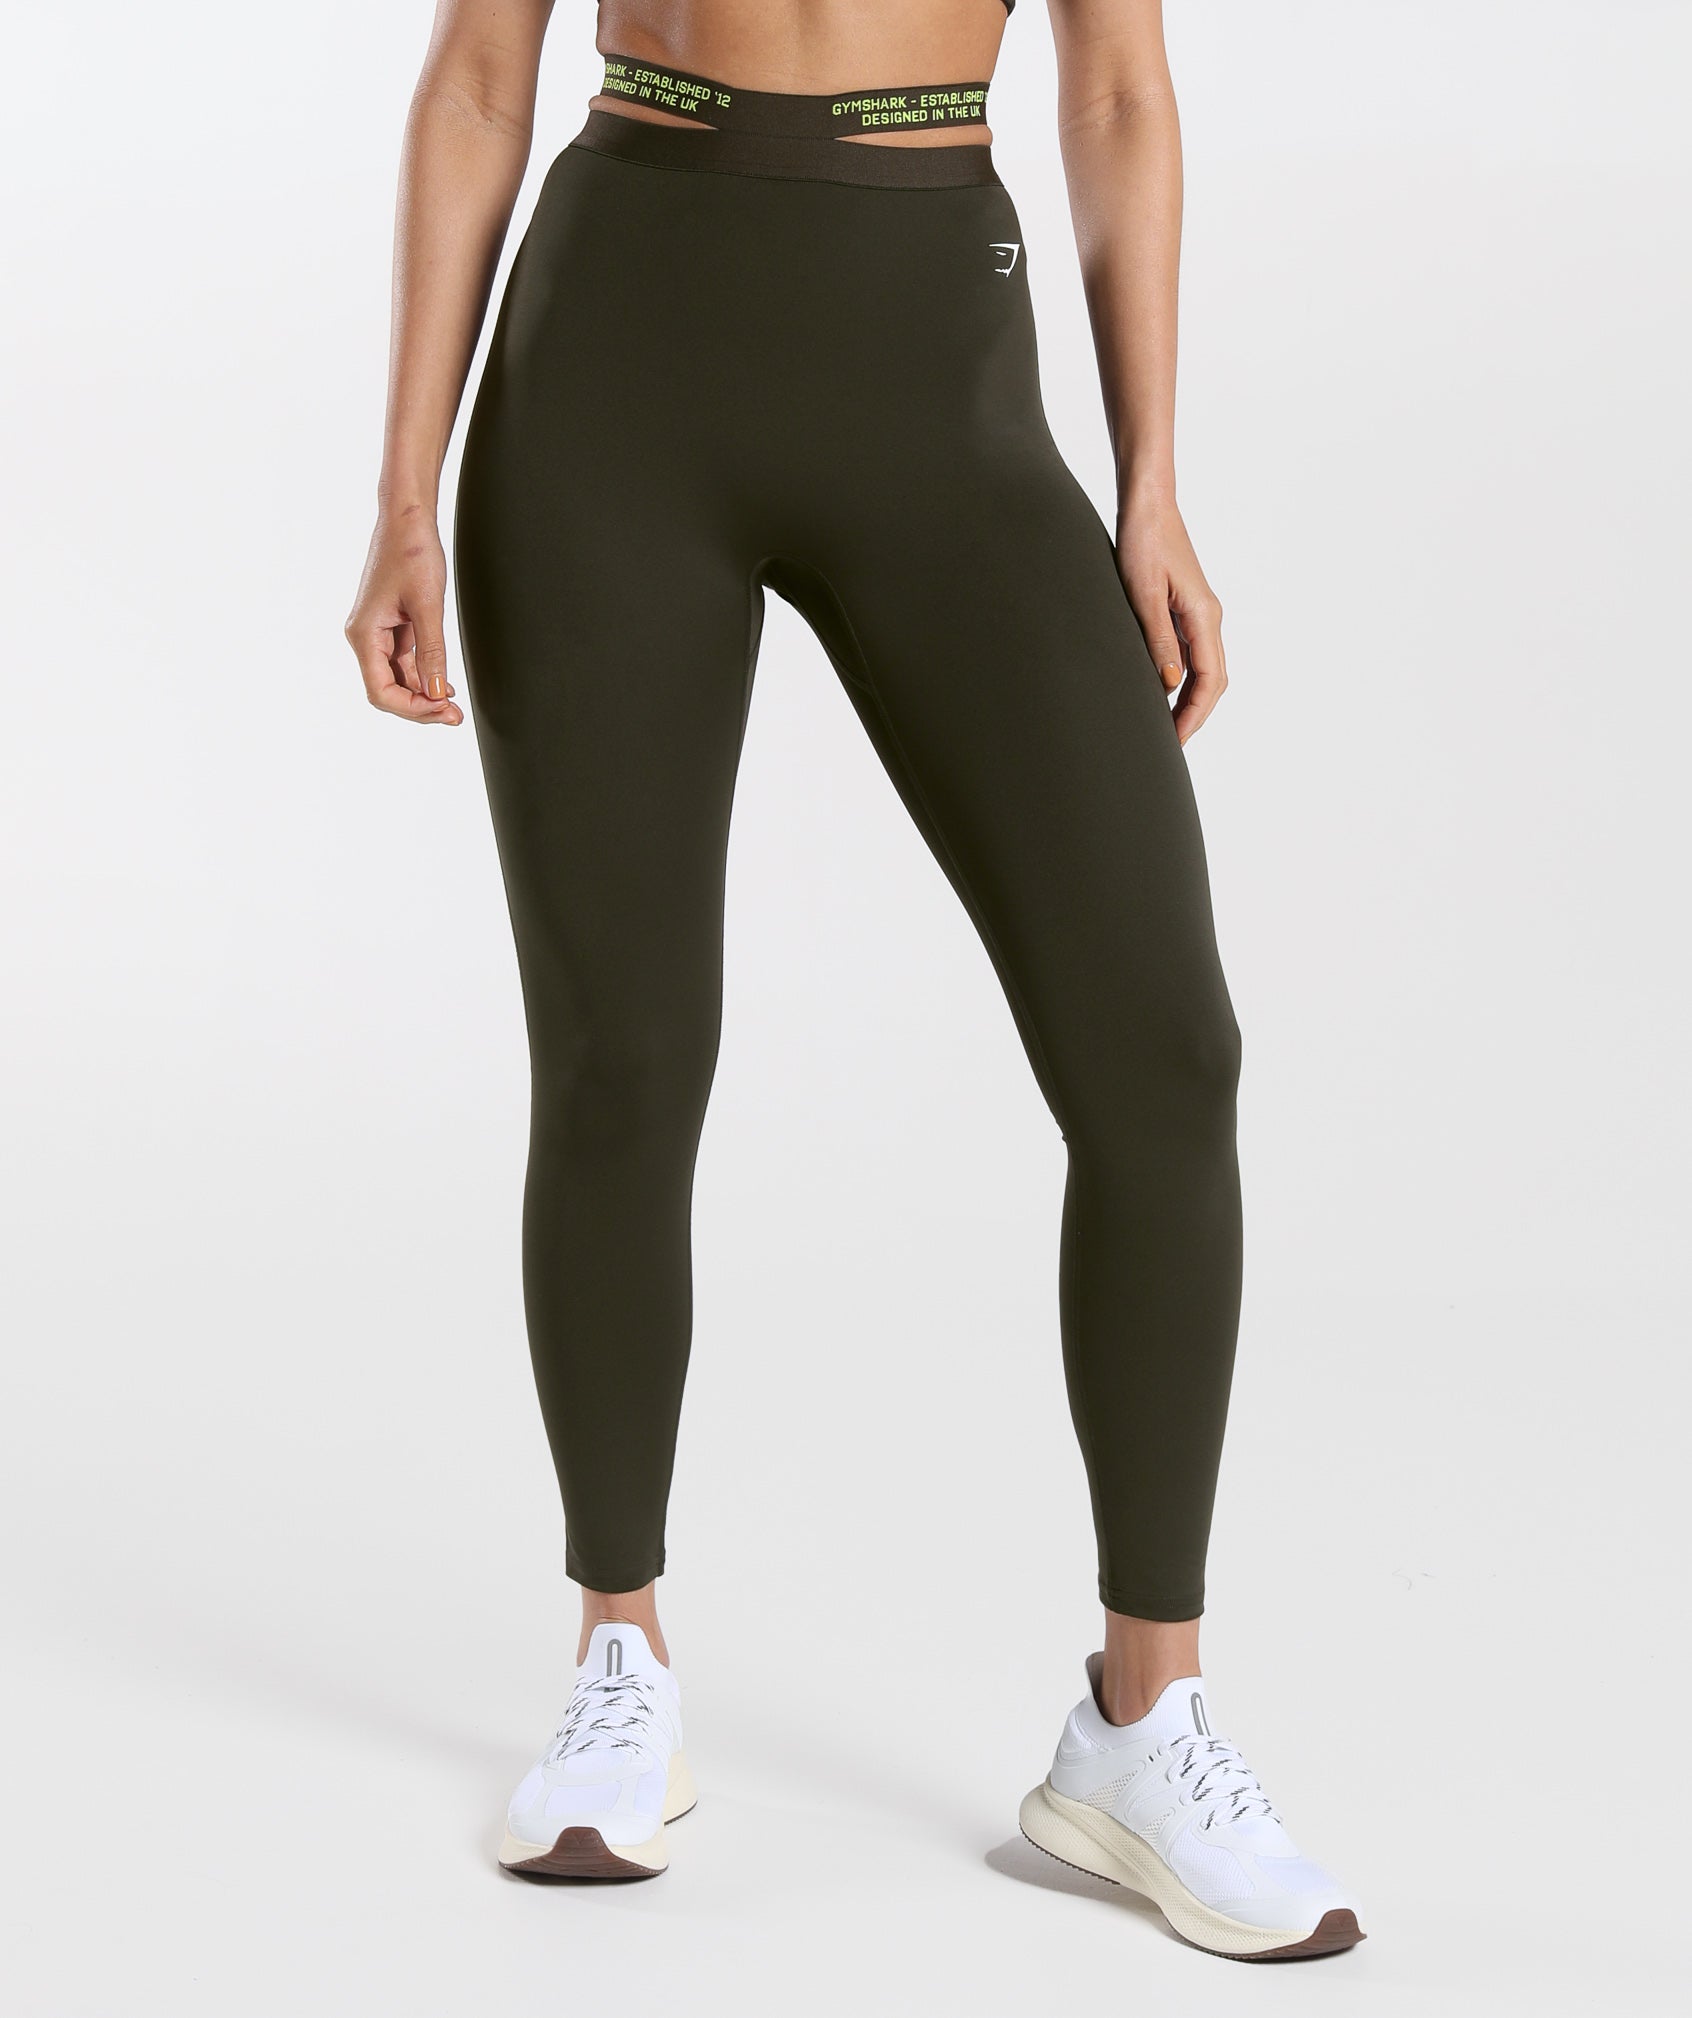 Gymshark leggings nwt Size XS - $40 New With Tags - From Lindsay